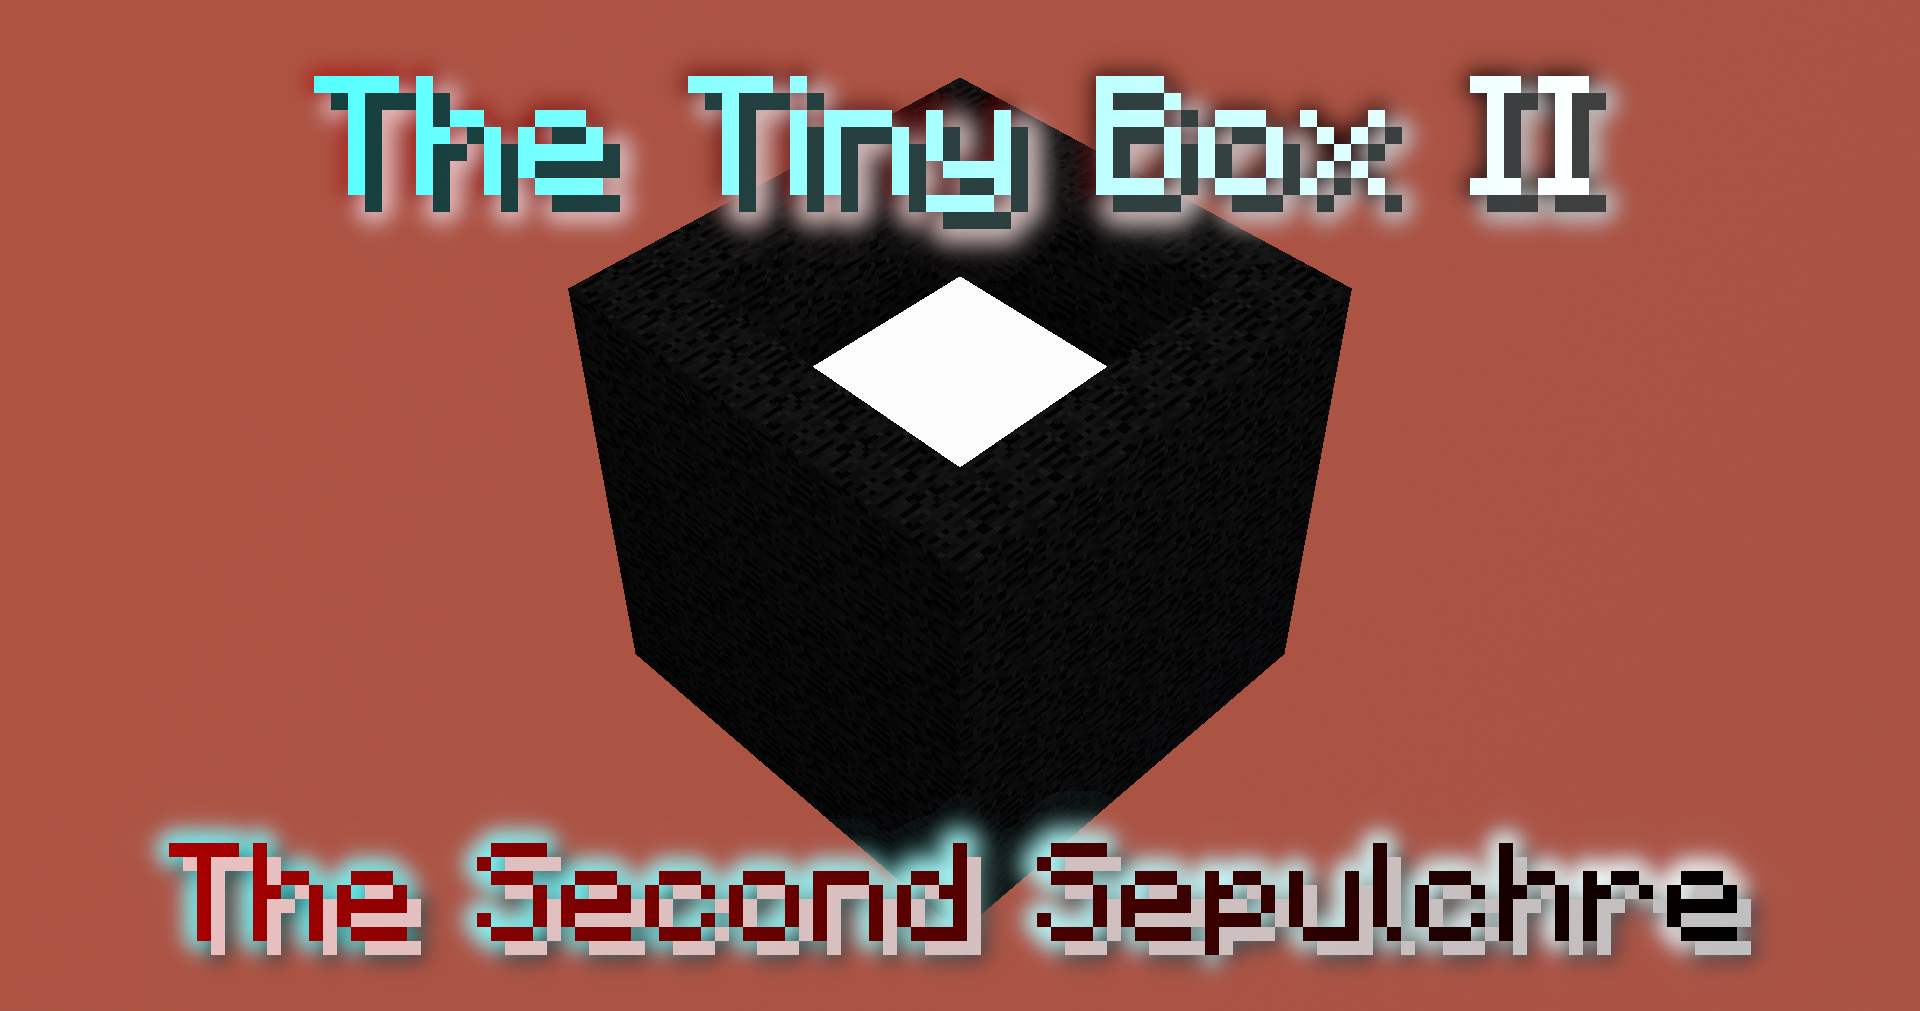 Download The Tiny Box II - The Second Sepulchre for Minecraft 1.15.2